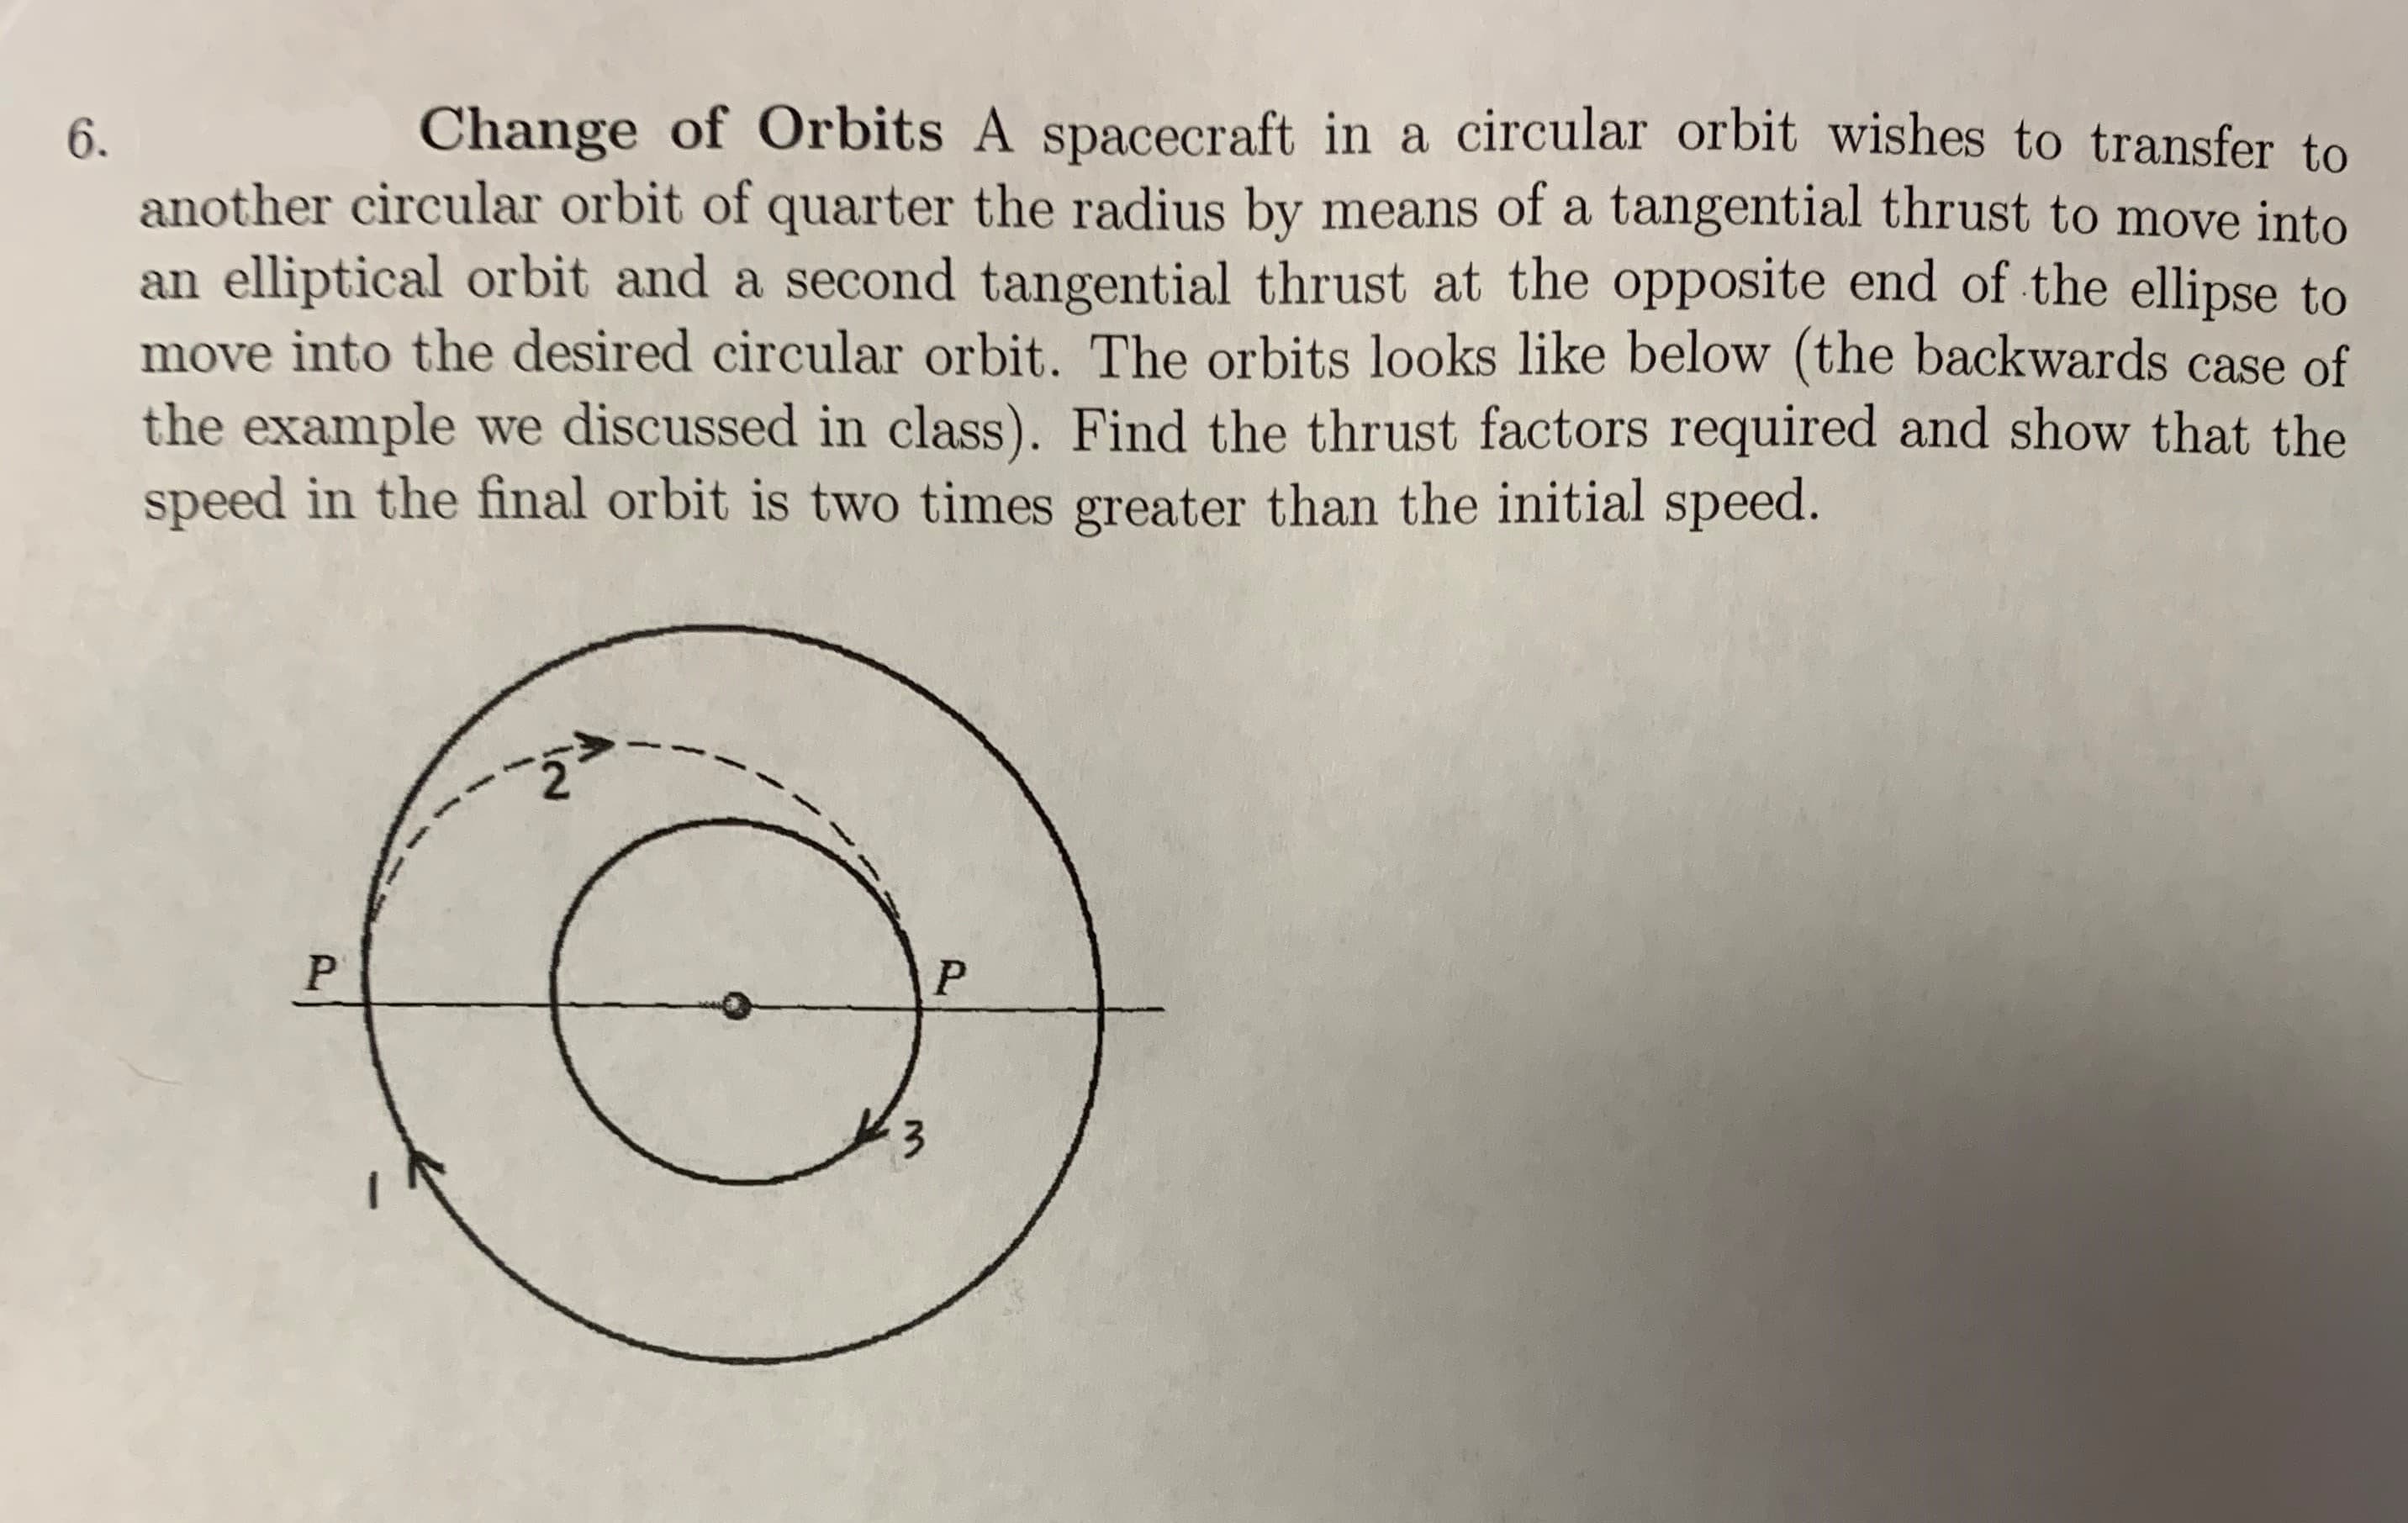 Change of Orbits A spacecraft in a circular orbit wishes to transfer to
6
another circular orbit of quarter the radius by means of a tangential thrust to move into
an elliptical orbit and a second tangential thrust at the opposite end of the ellipse to
move into the desired circular orbit. The orbits looks like below (the backwards case of
the example we discussed in class). Find the thrust factors required and show that the
speed in the final orbit is two times greater than the initial speed.
P
PP
